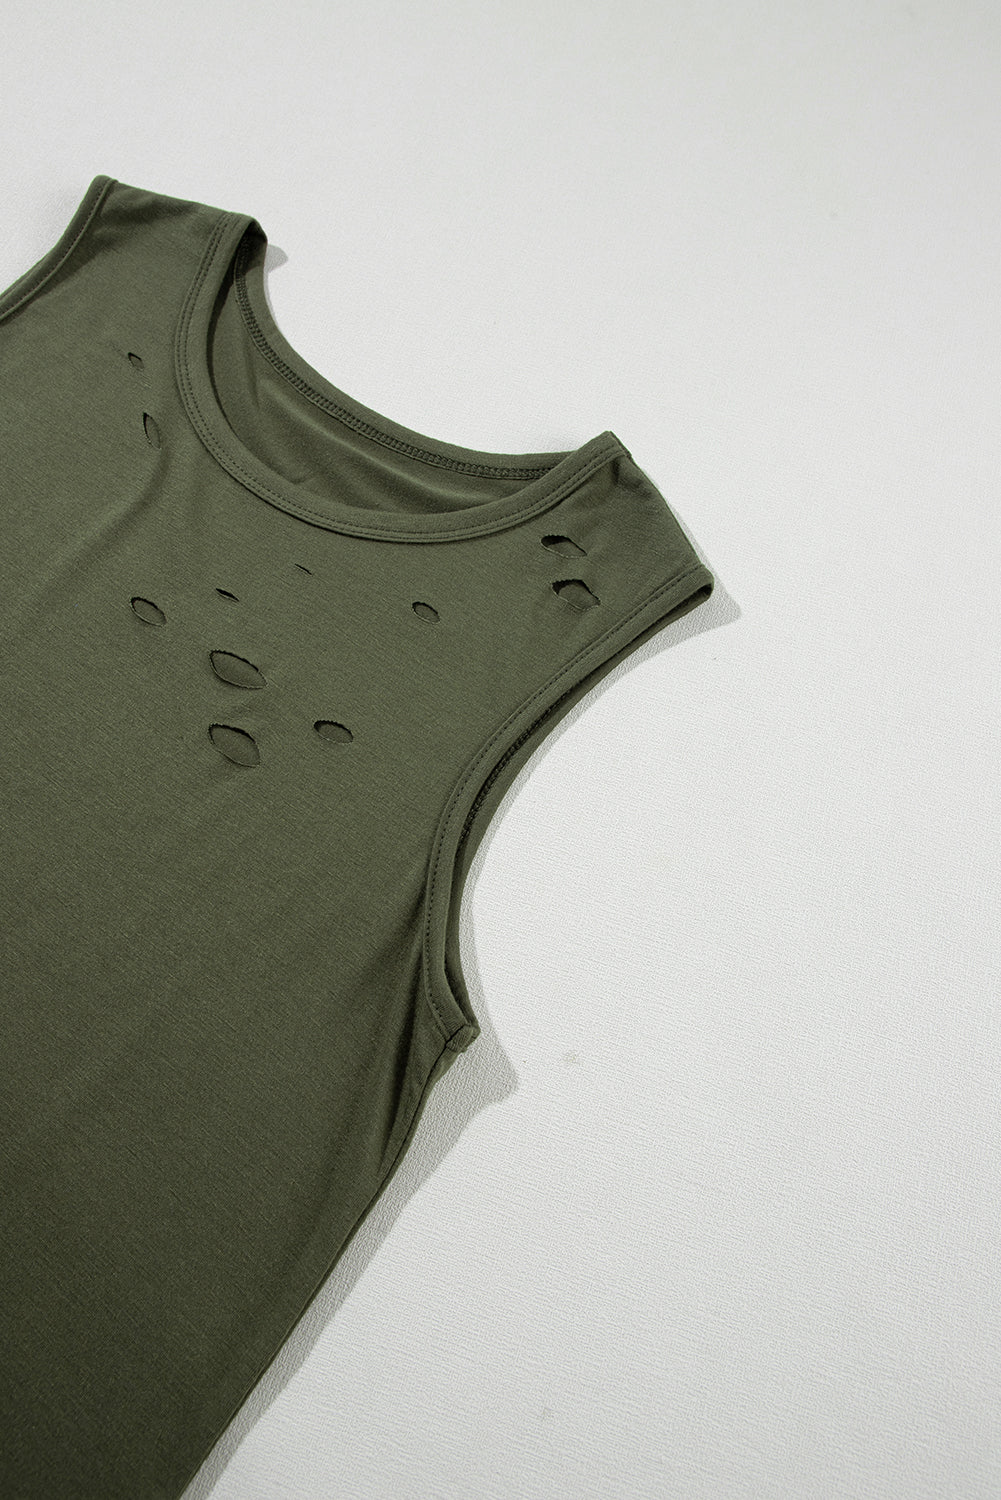 Jungle Green Solid Color Distressed Holes Crew Neck Tank Top